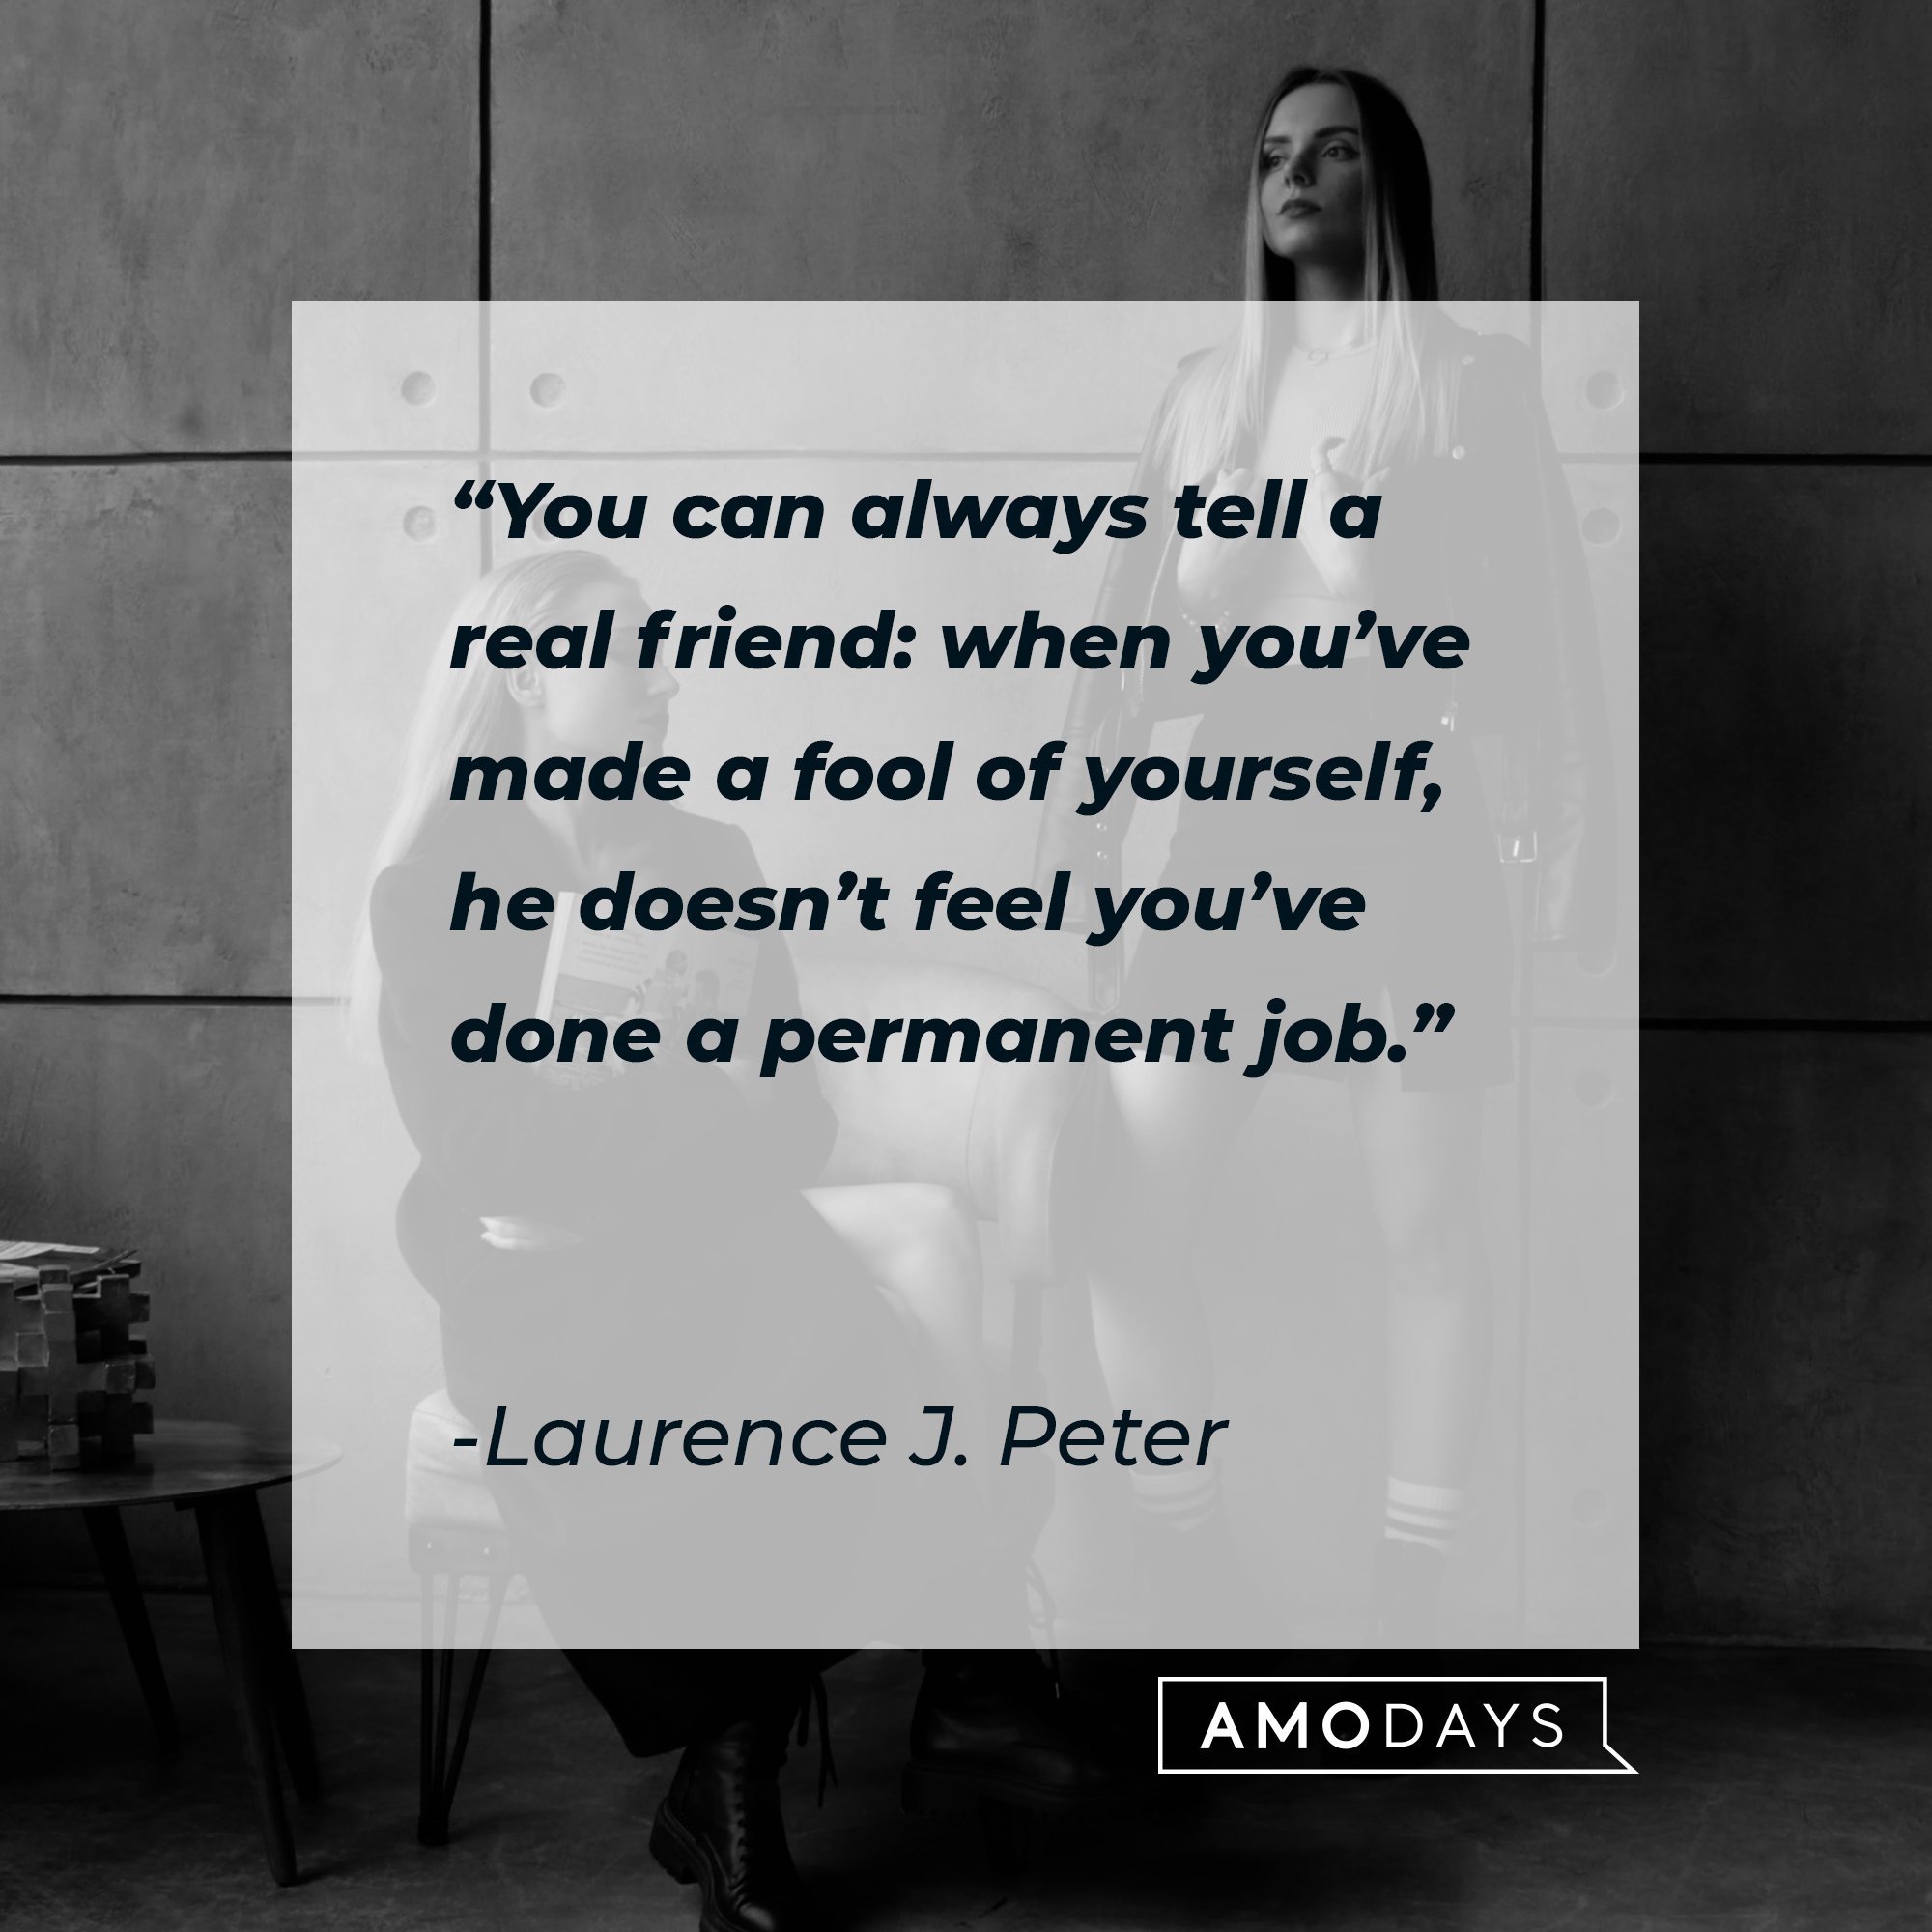 Laurence J. Peter’s quote: “You can always tell a real friend: when you’ve made a fool of yourself, he doesn’t feel you’ve done a permanent job.” | Image: AmoDays